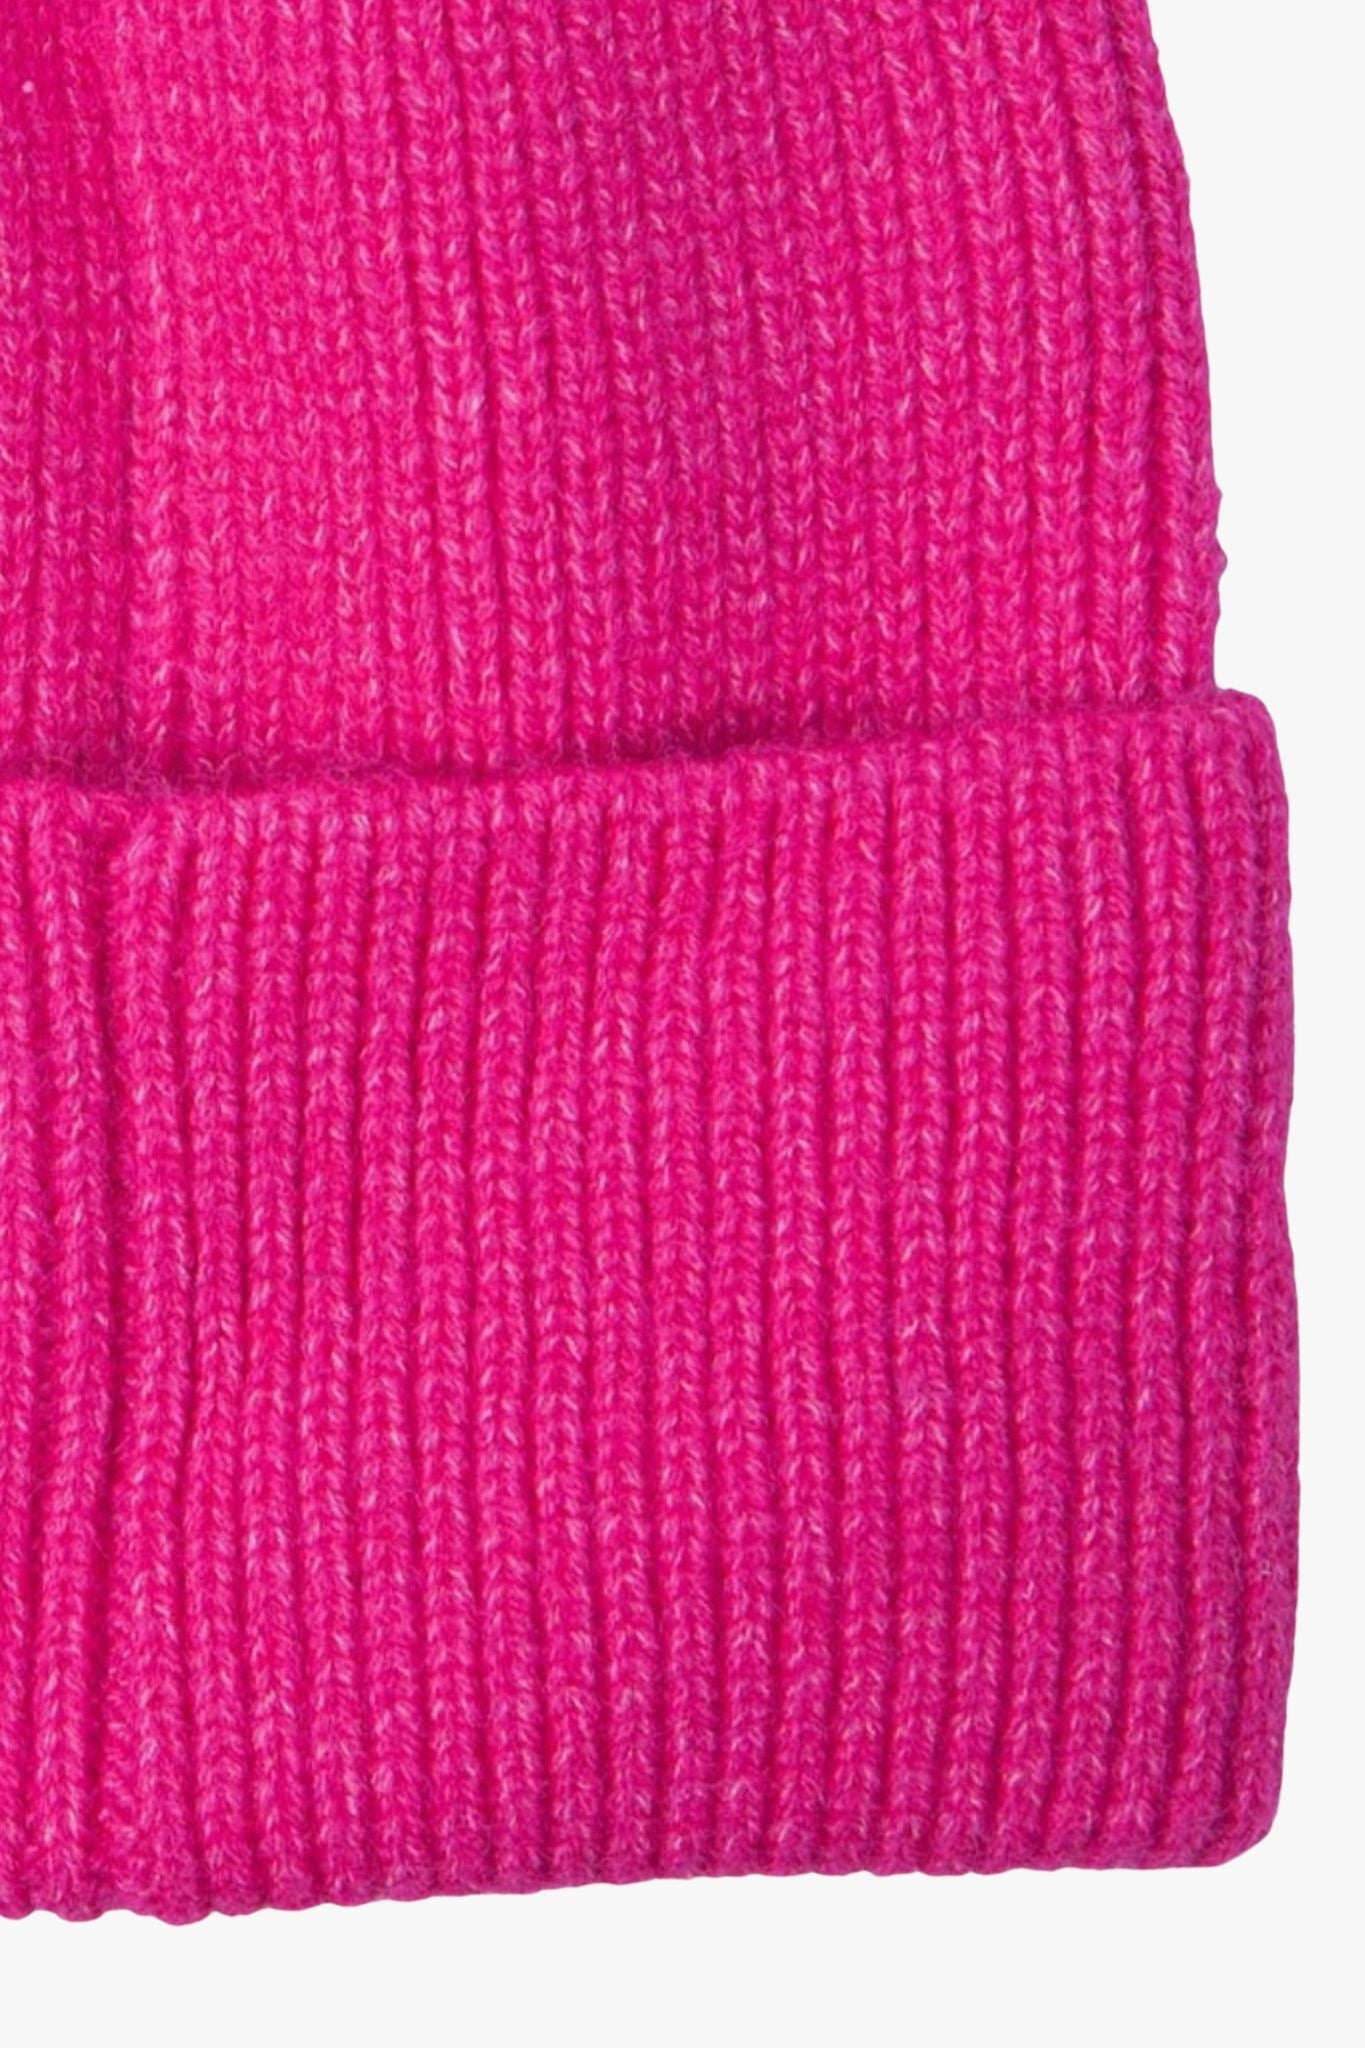 close up of the ribbed knitted material